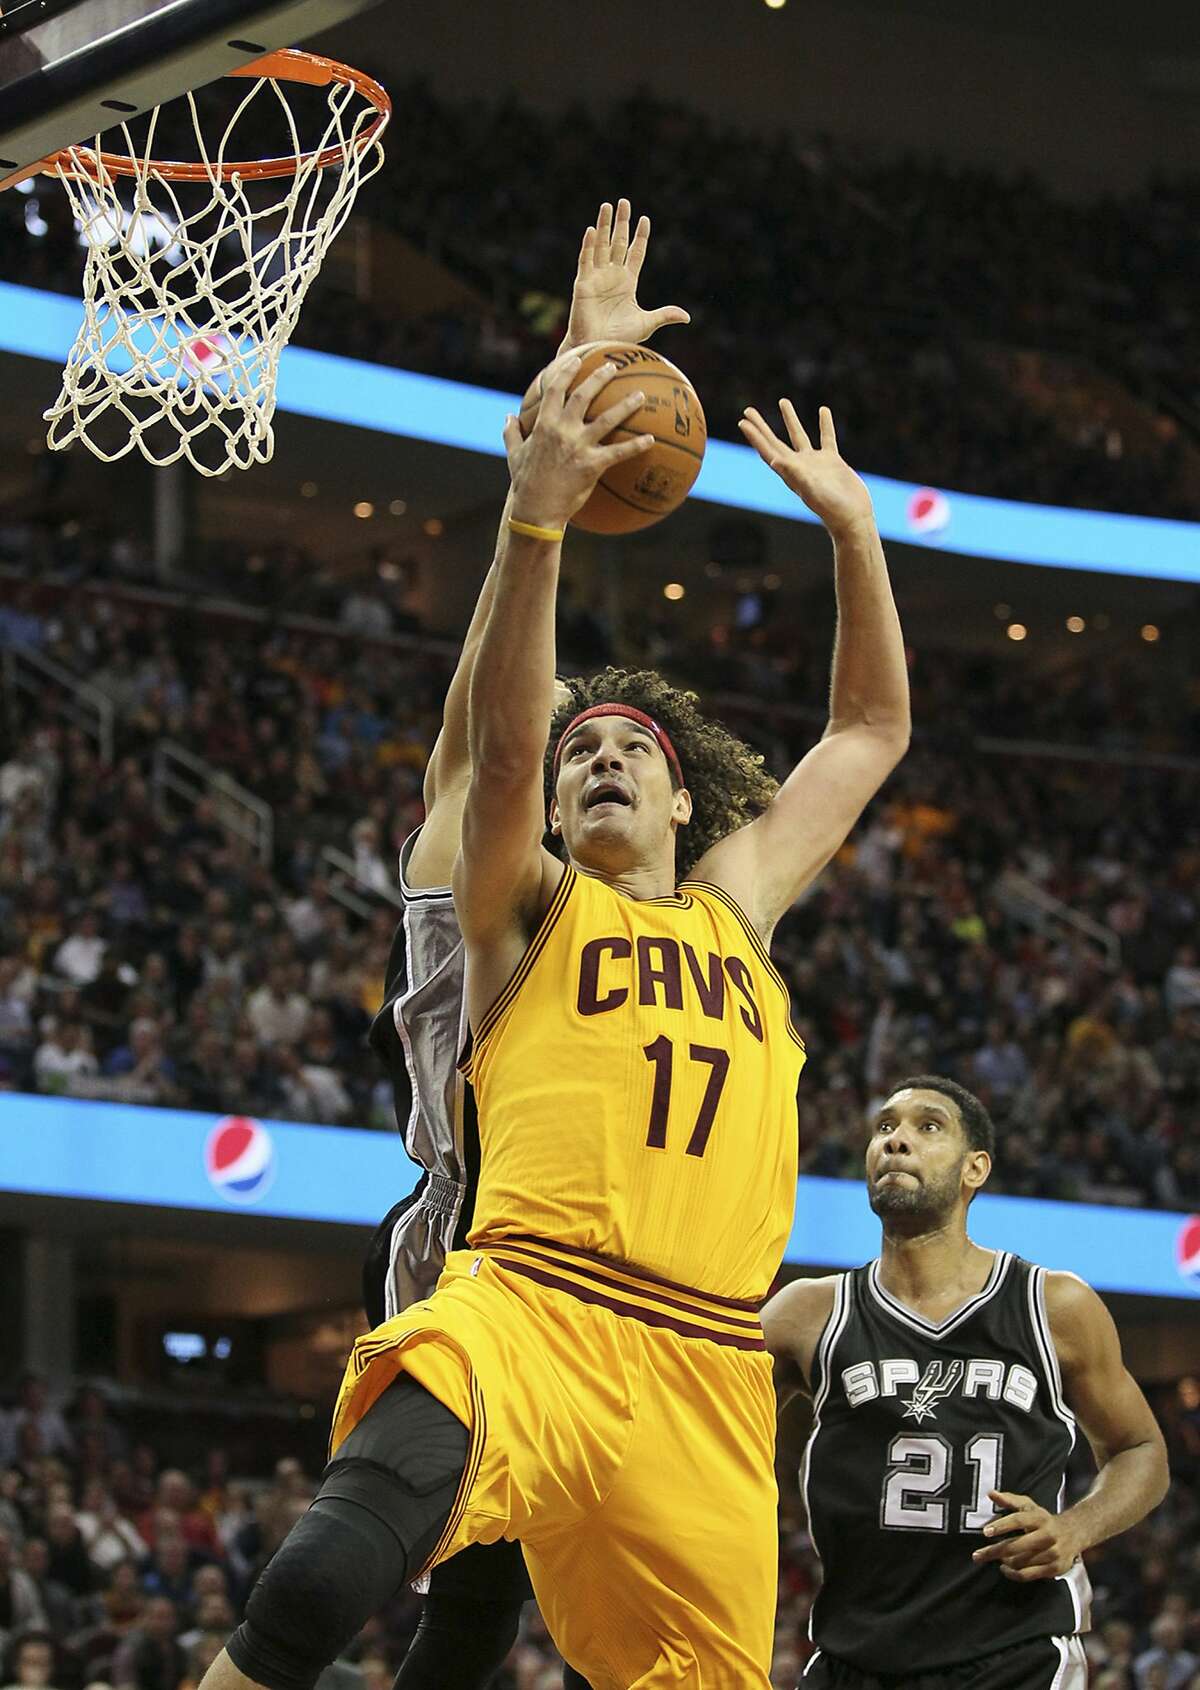 The Cleveland Cavaliers' Anderson Varejao attempts a shot as San Antonio Spurs' Danny Green, rear, fouls him in the fourth quarter on Wednesday, Nov. 19, 2014, at Quicken Loans Arena in Cleveland.